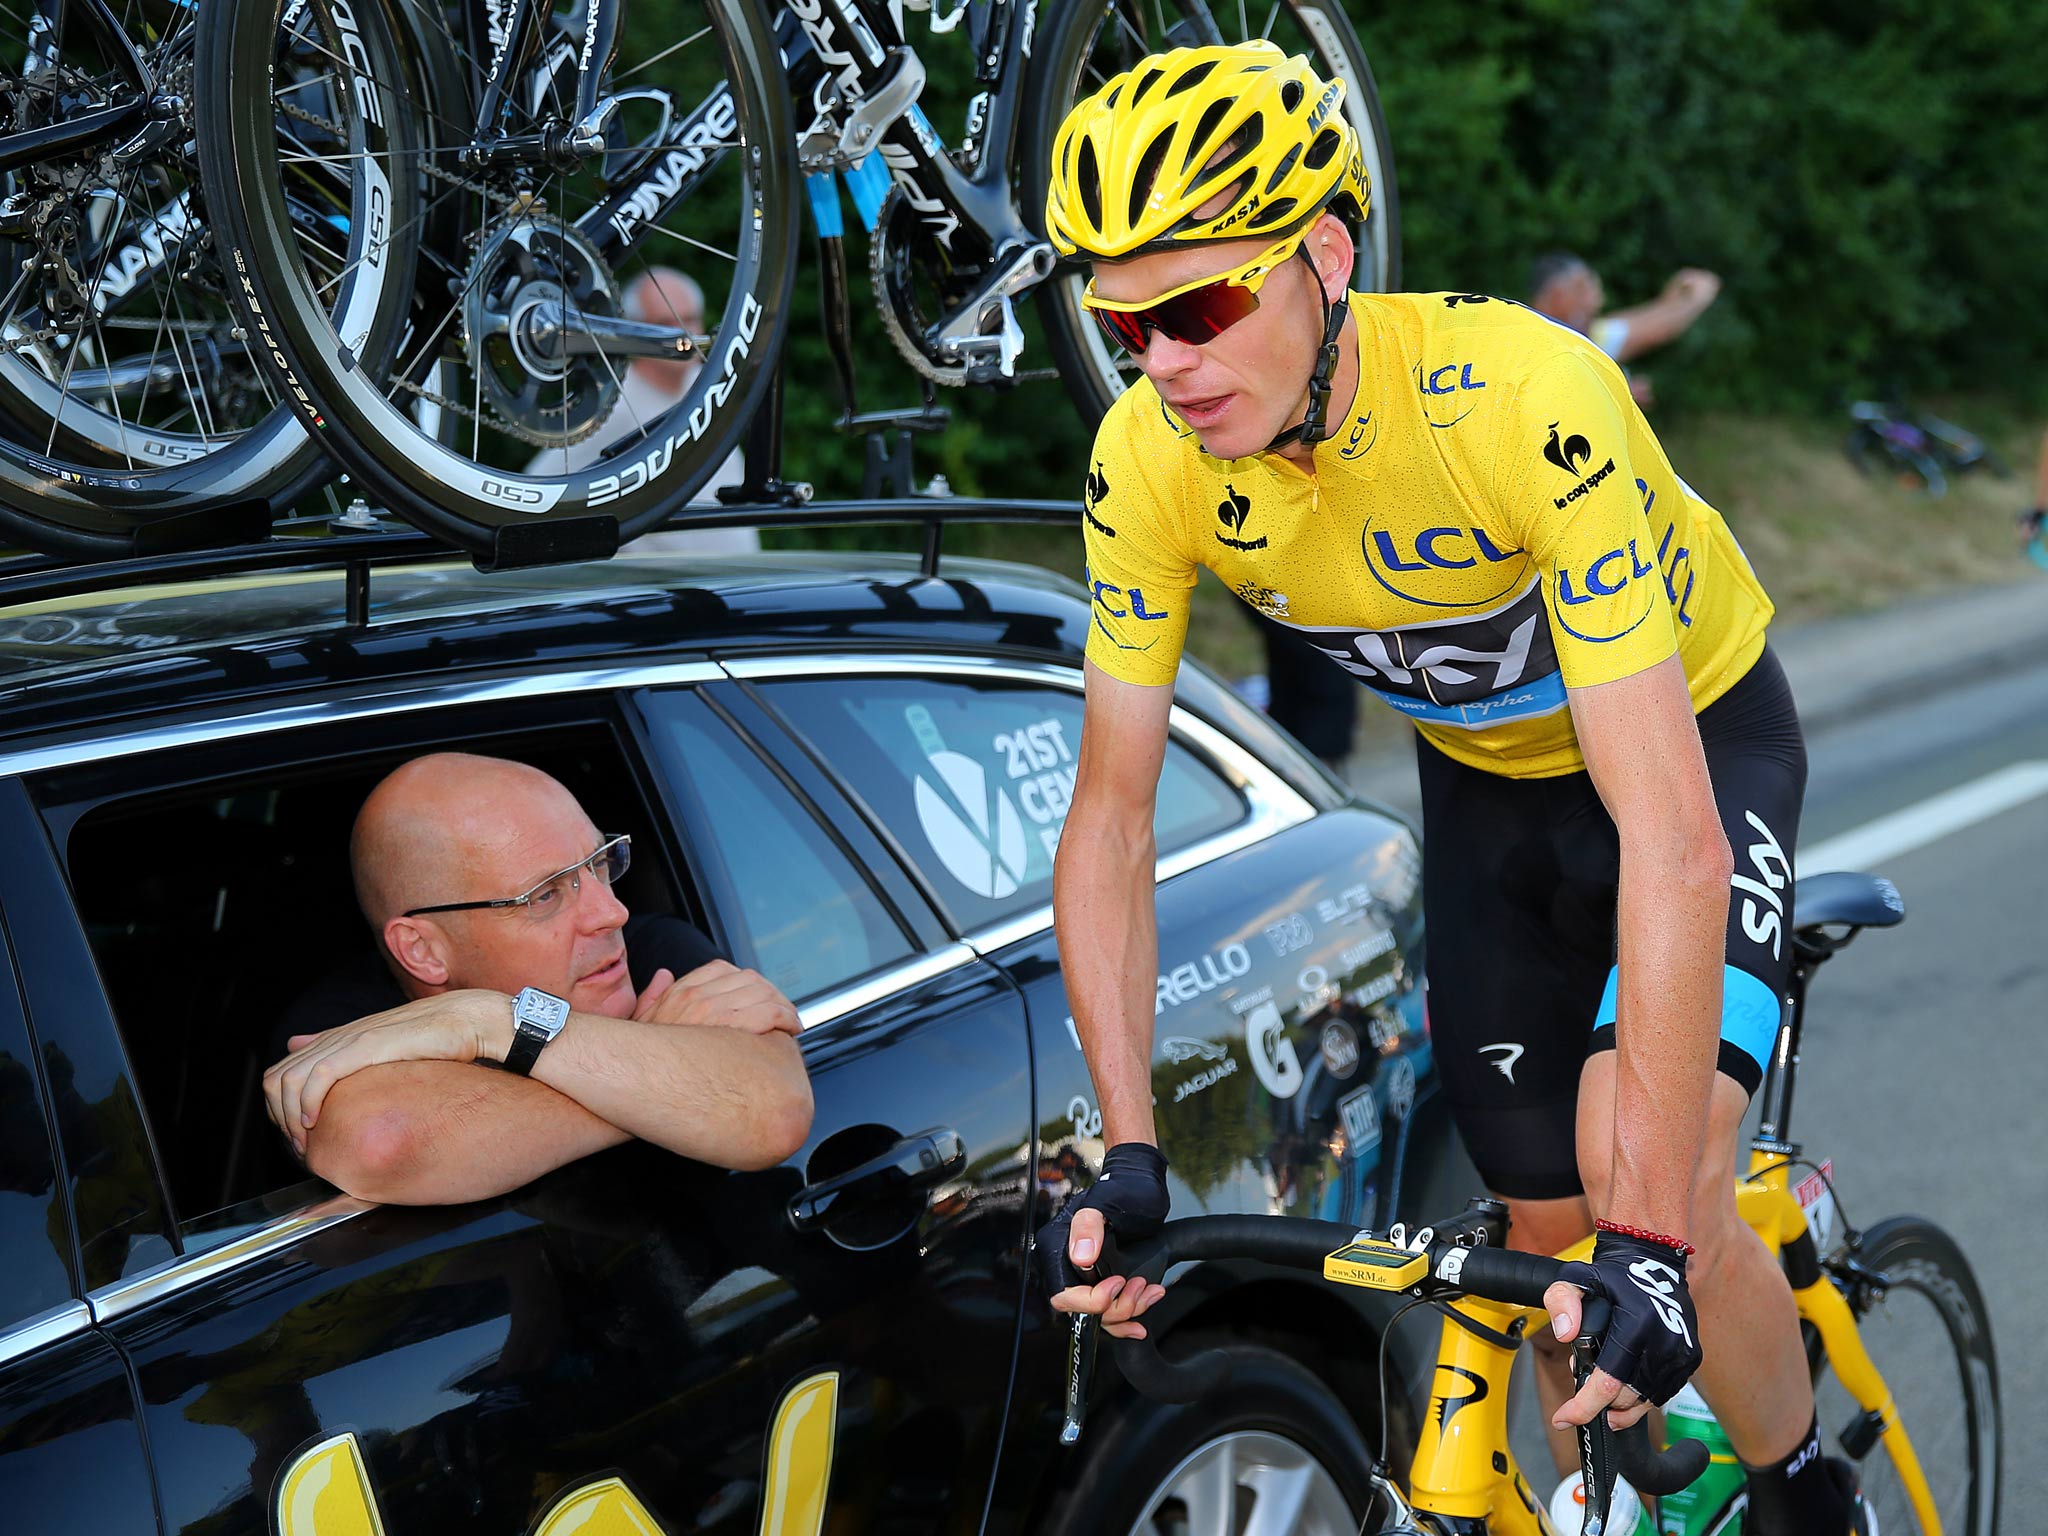 Sir Dave Brailsford speaks with the winner of the 2013 Tour de France, Chris Froome, during the final stage